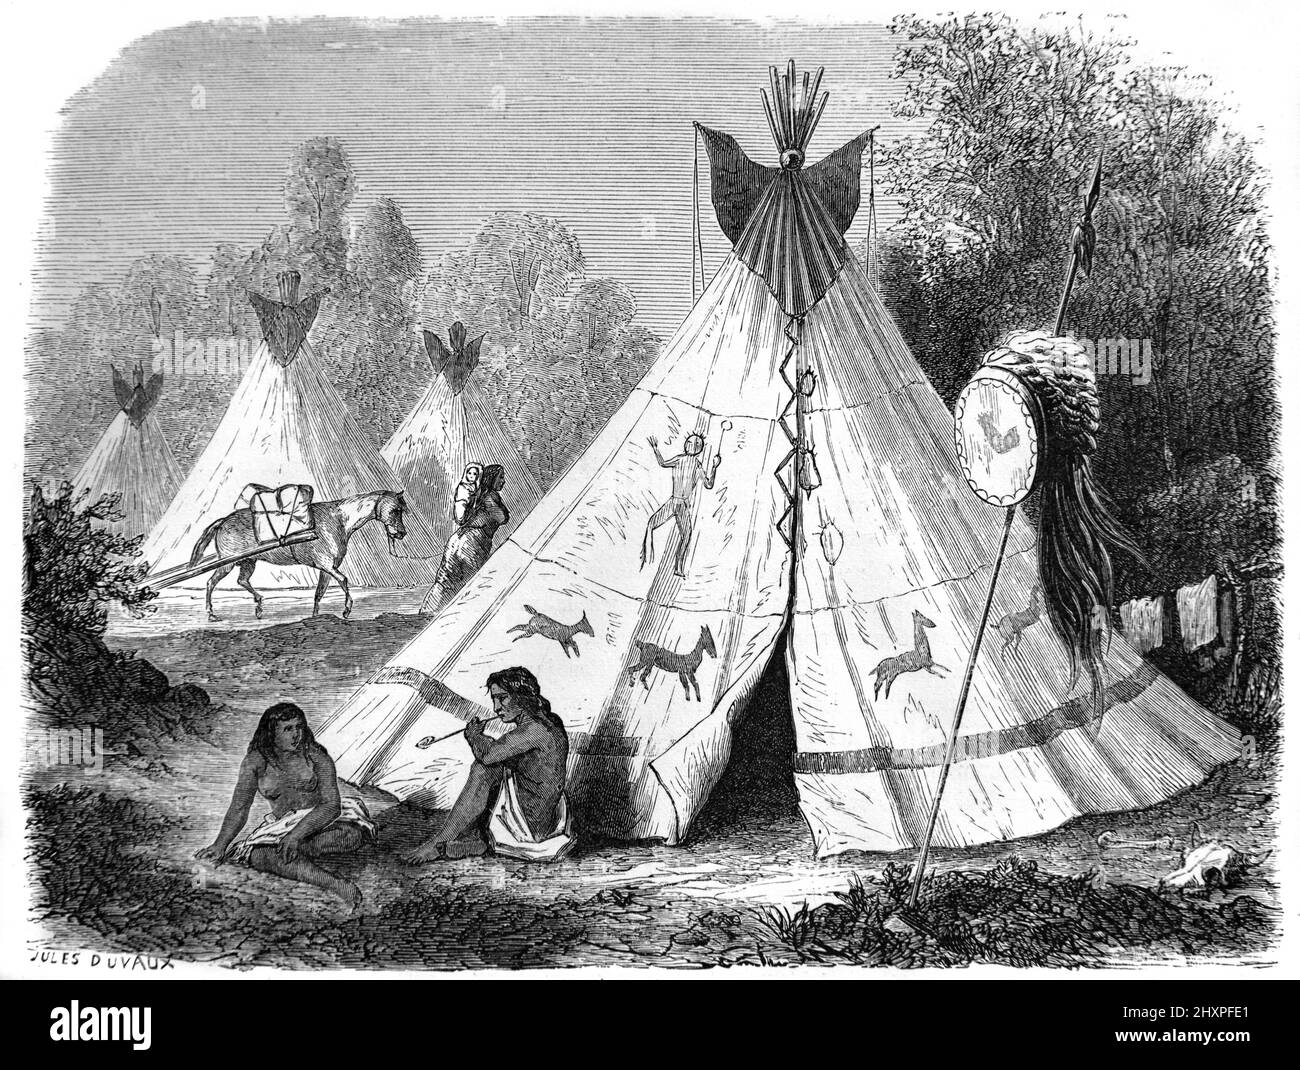 Comanche Native American Village or Camp with Tipis, Tepees or Teepee, in the Great Plains Region US, USA or United States of America. Vintage Illustration or Engraving 1860. Stock Photo